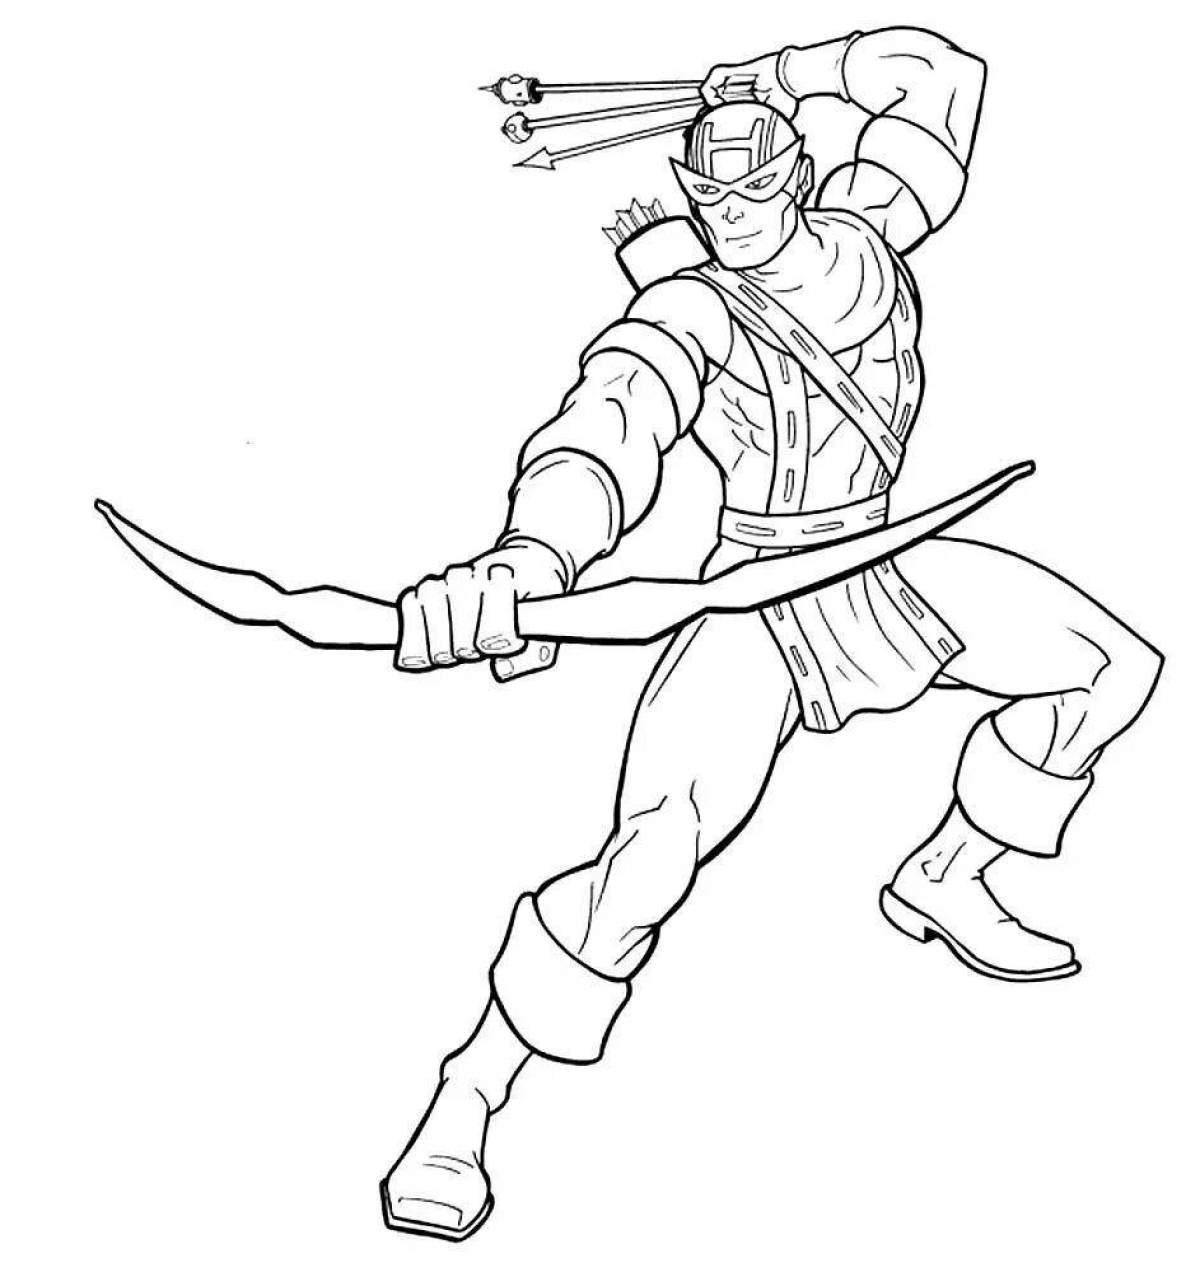 Strong Archer coloring page